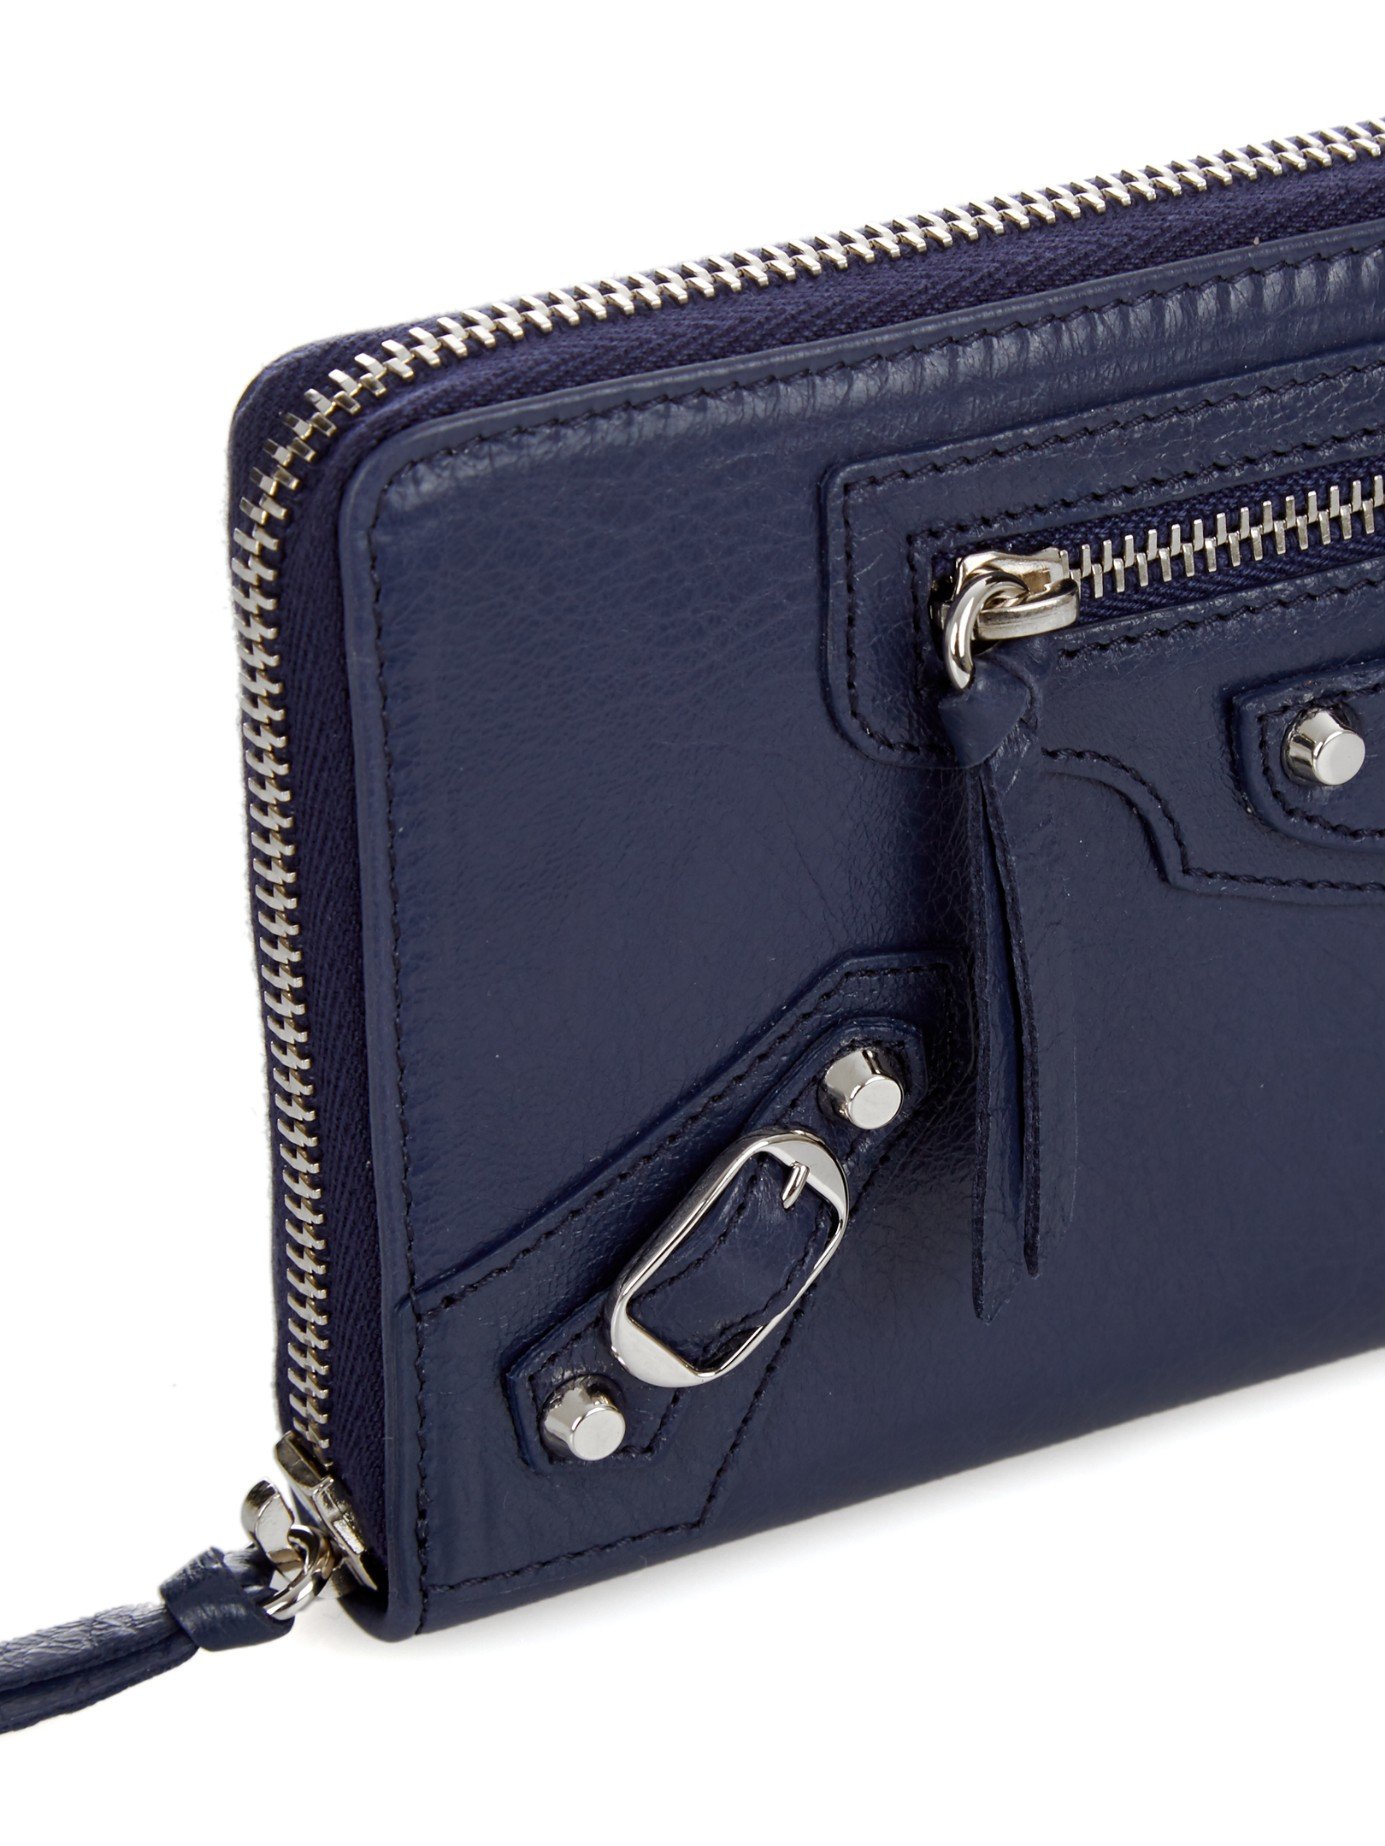 Lyst - Balenciaga Classic Zip-around Leather Wallet in Blue